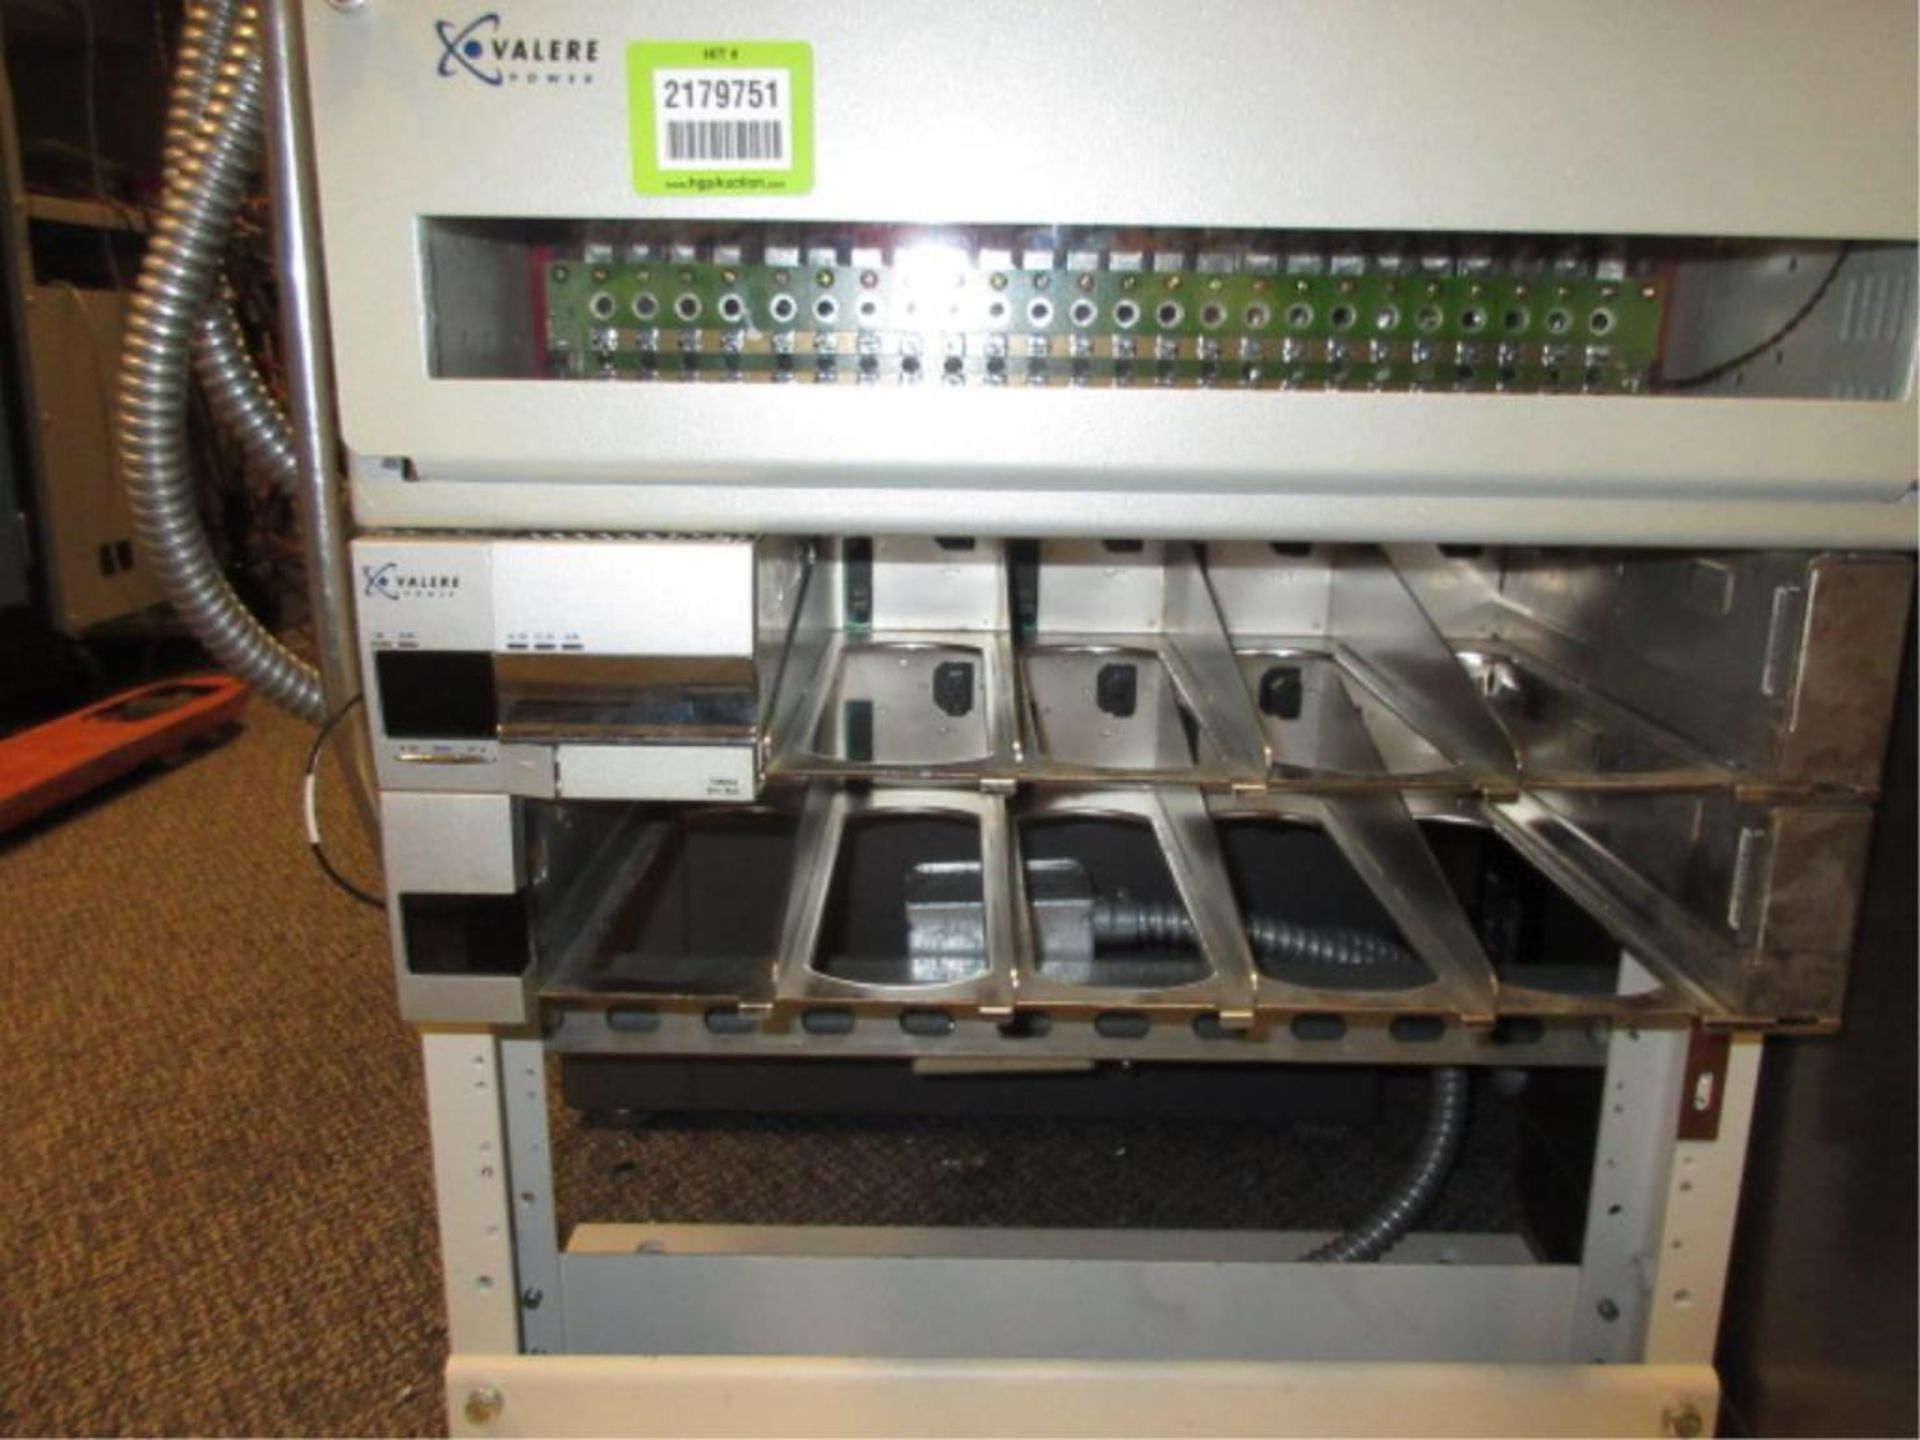 Valere EC1000 Power Supply. Rack Power Supply Chassis. HIT# 2179751. Loc: W4.195. Asset Located at - Image 2 of 3